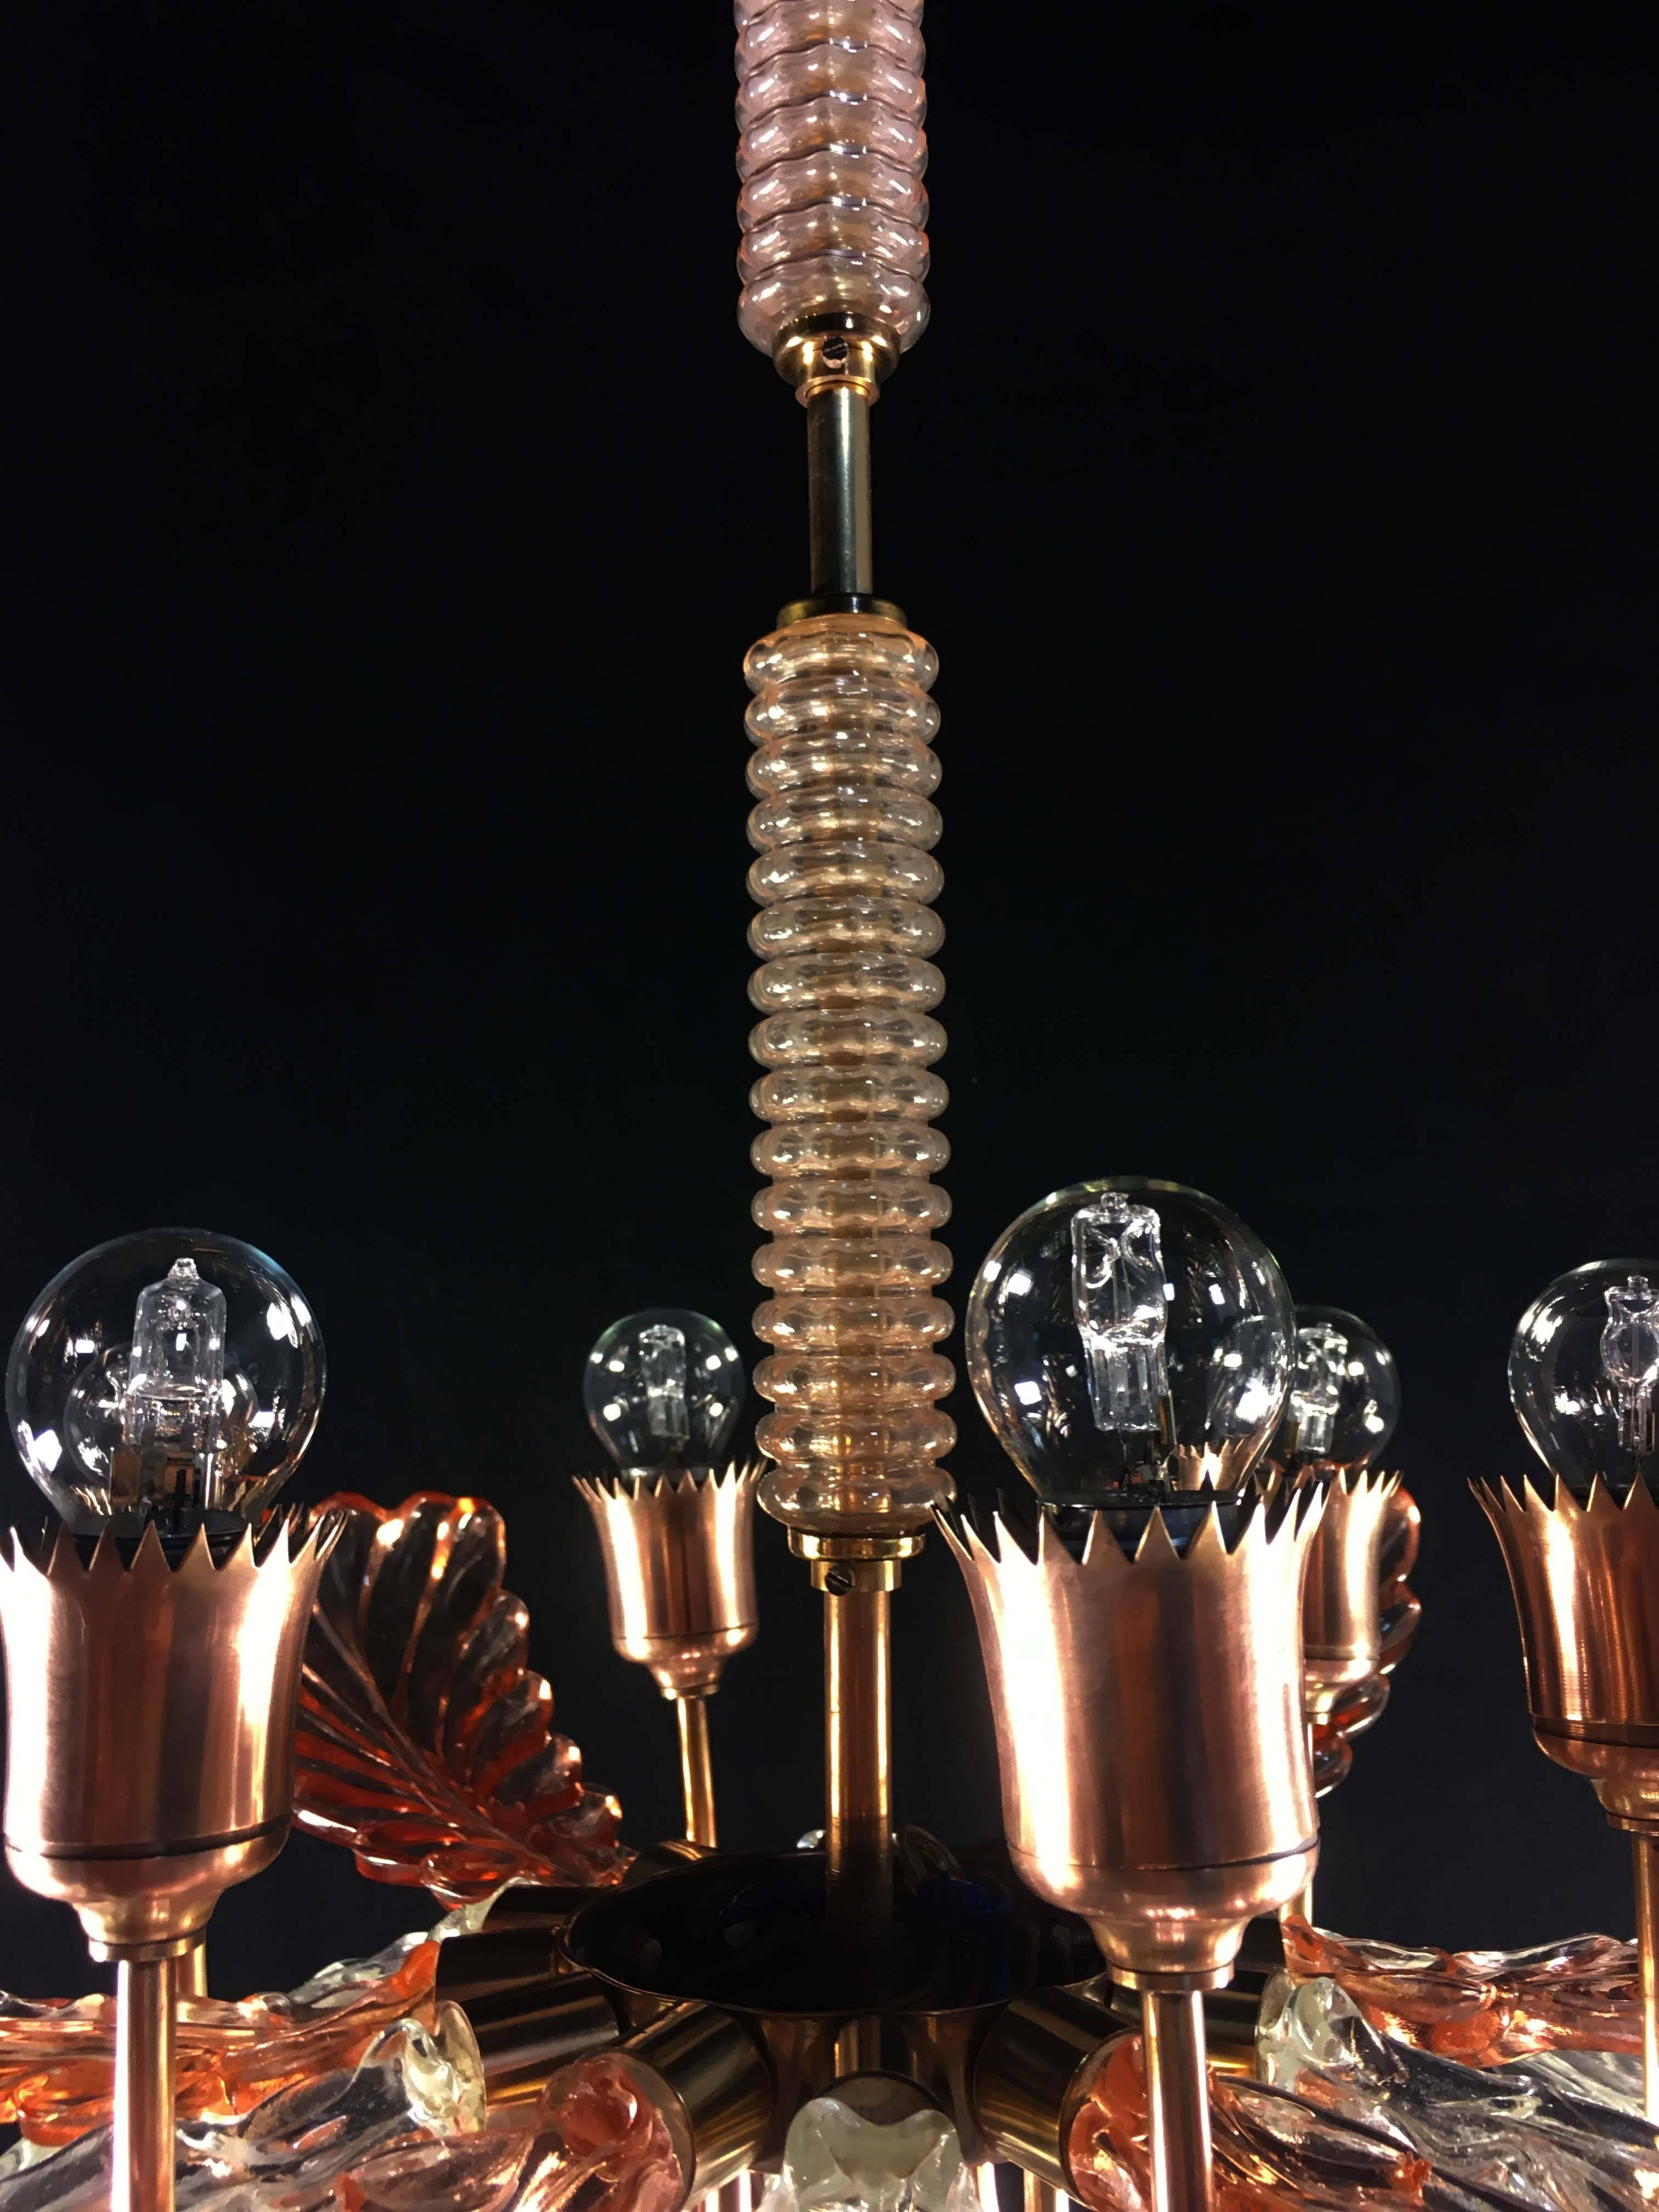 Elegant and Rare Chandelier by Barovier & Toso, Murano, 1940s For Sale 7